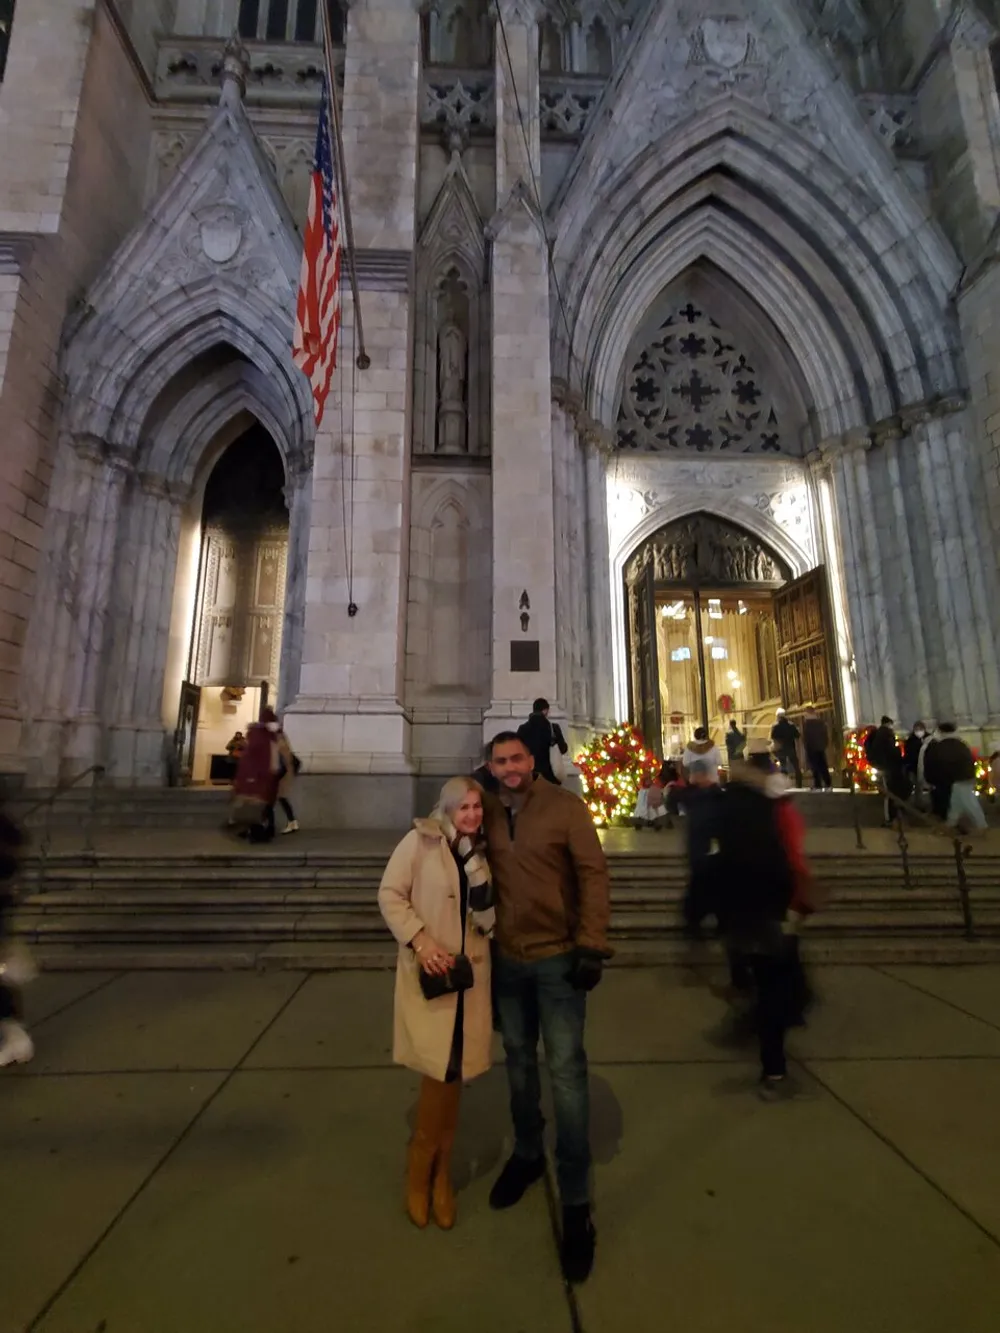 A couple is posing for a photo in front of an ornately designed cathedral entrance adorned with an American flag and holiday decorations